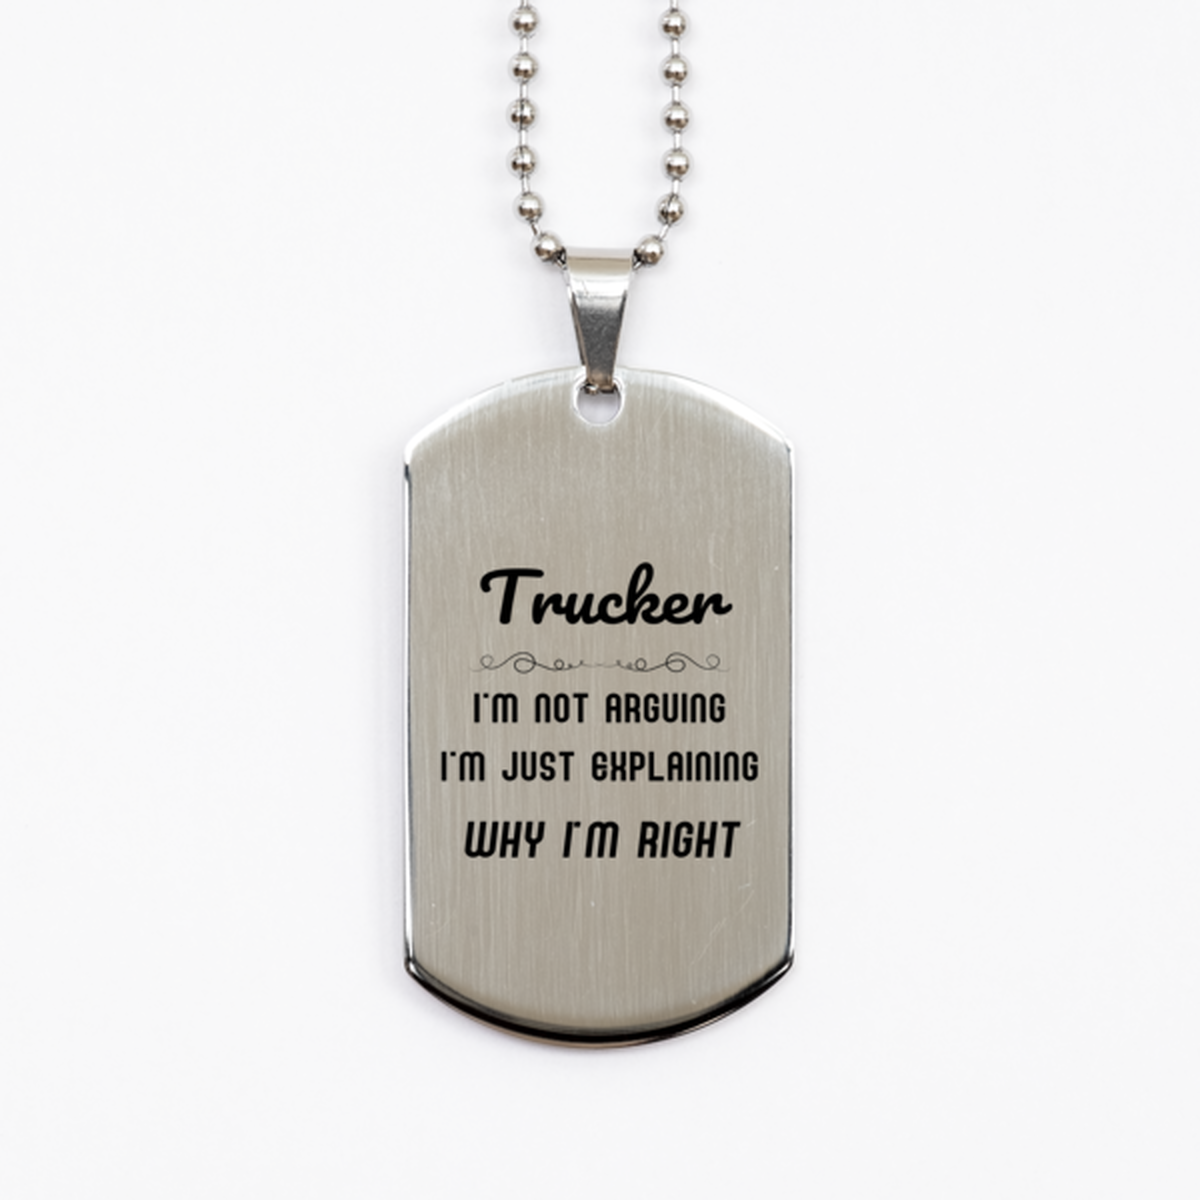 Trucker I'm not Arguing. I'm Just Explaining Why I'm RIGHT Silver Dog Tag, Funny Saying Quote Trucker Gifts For Trucker Graduation Birthday Christmas Gifts for Men Women Coworker